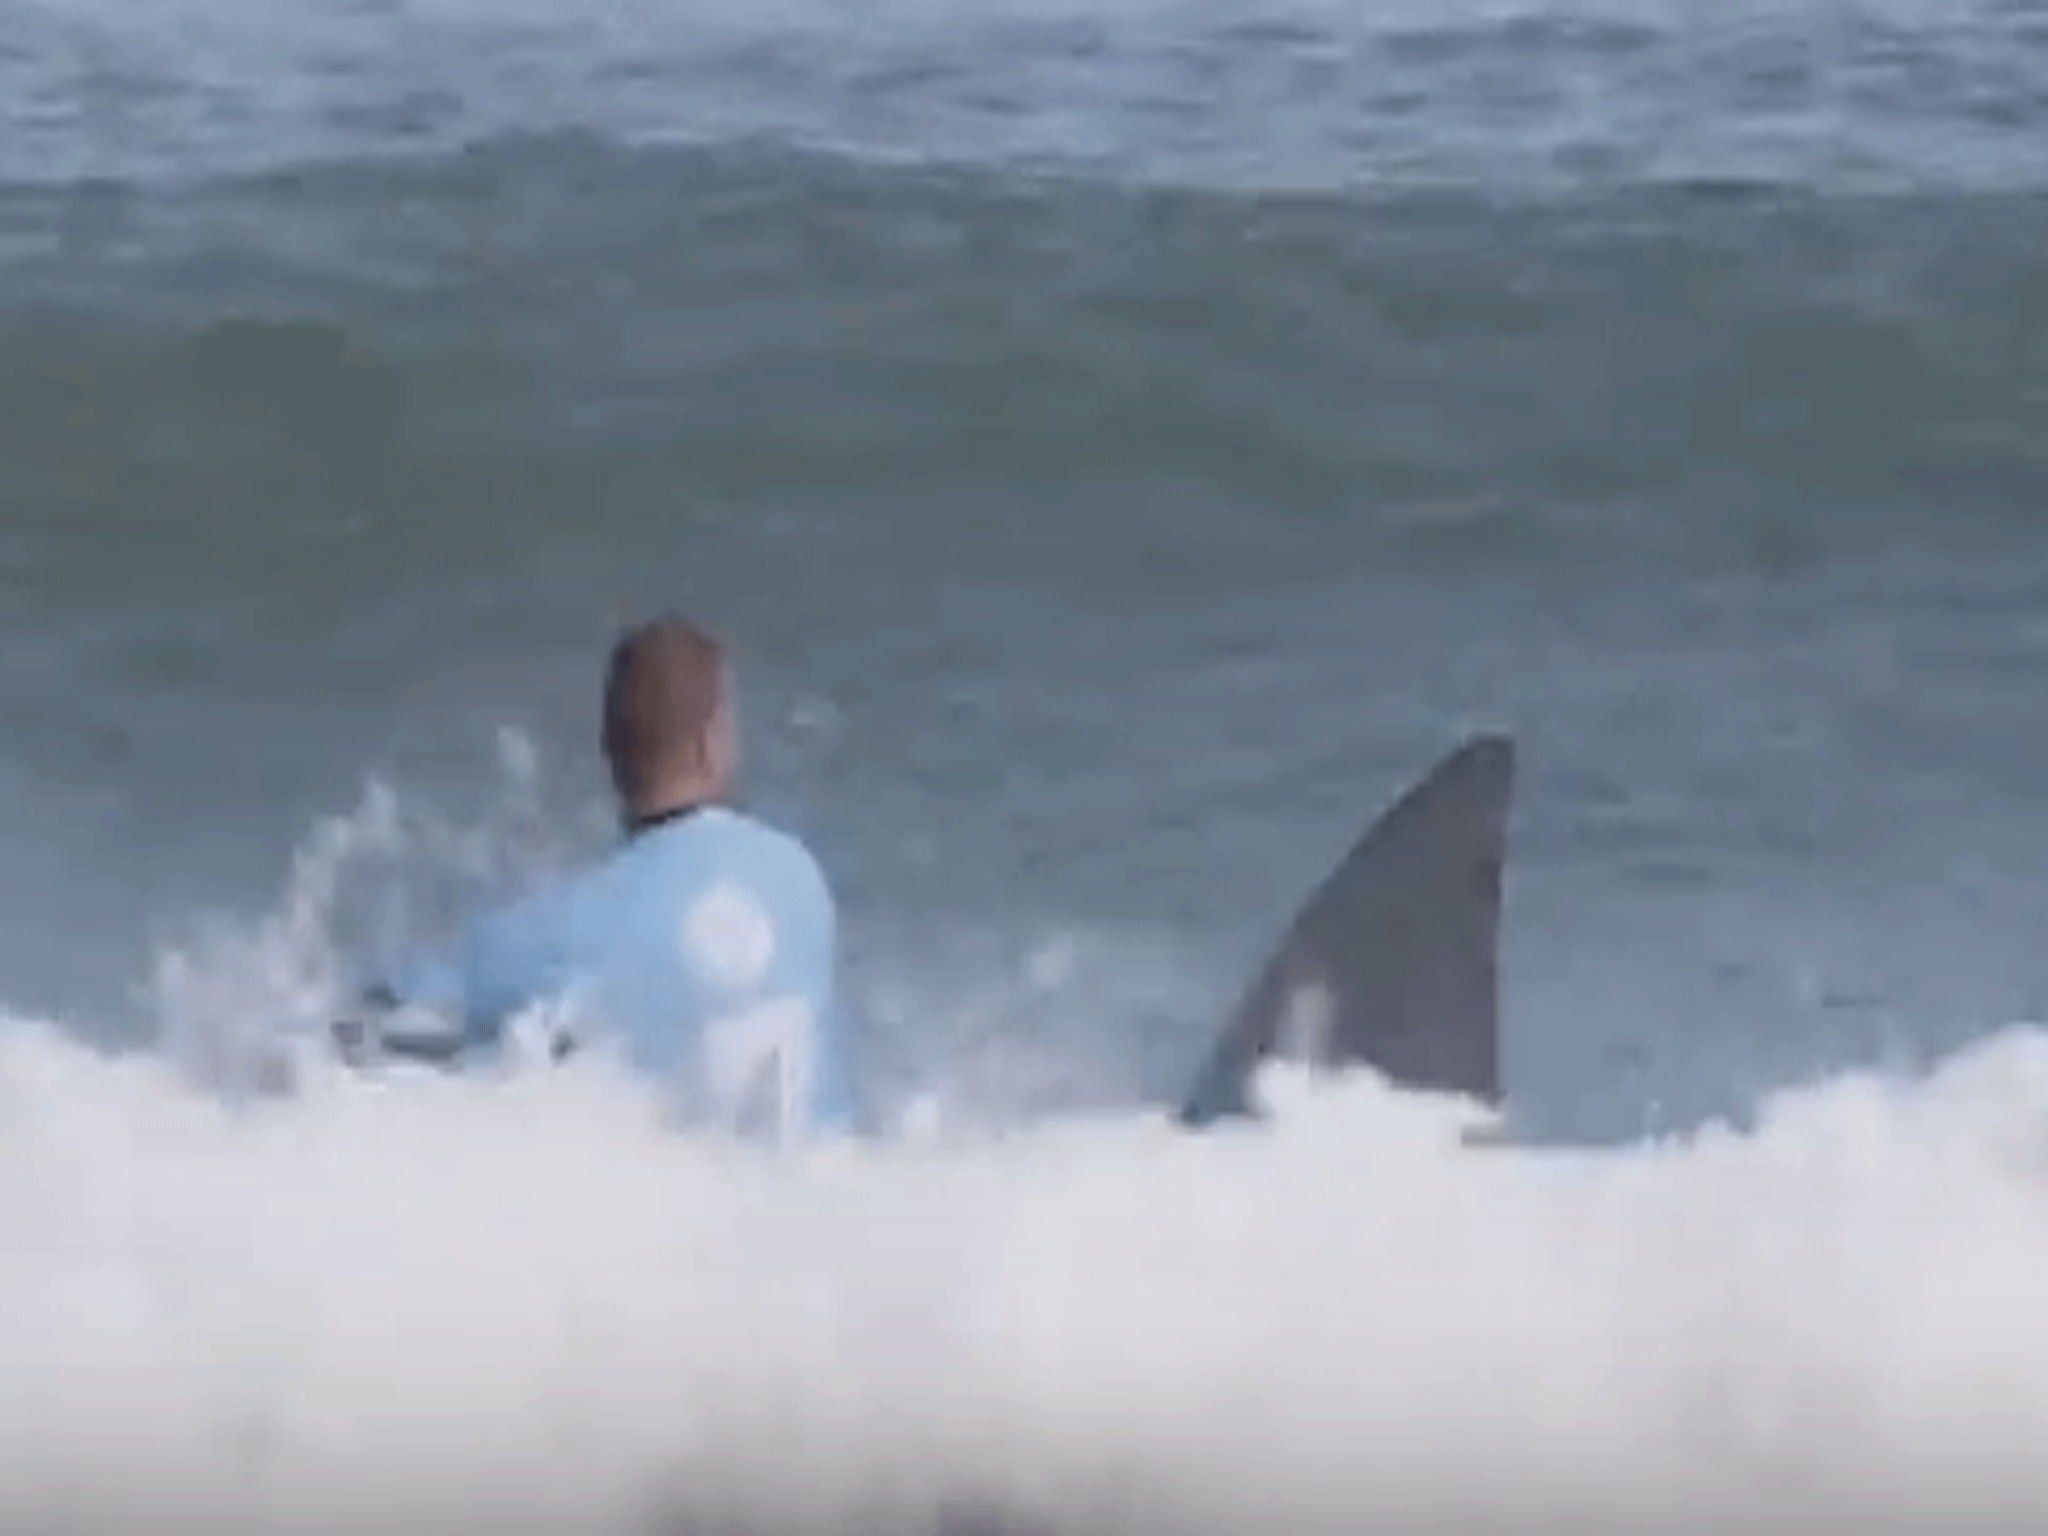 The advert begins with a close-up shot of a Mike Fanning lookalike in the sea, suddenly approached by a shark fin before momentarily disappearing behind a wave